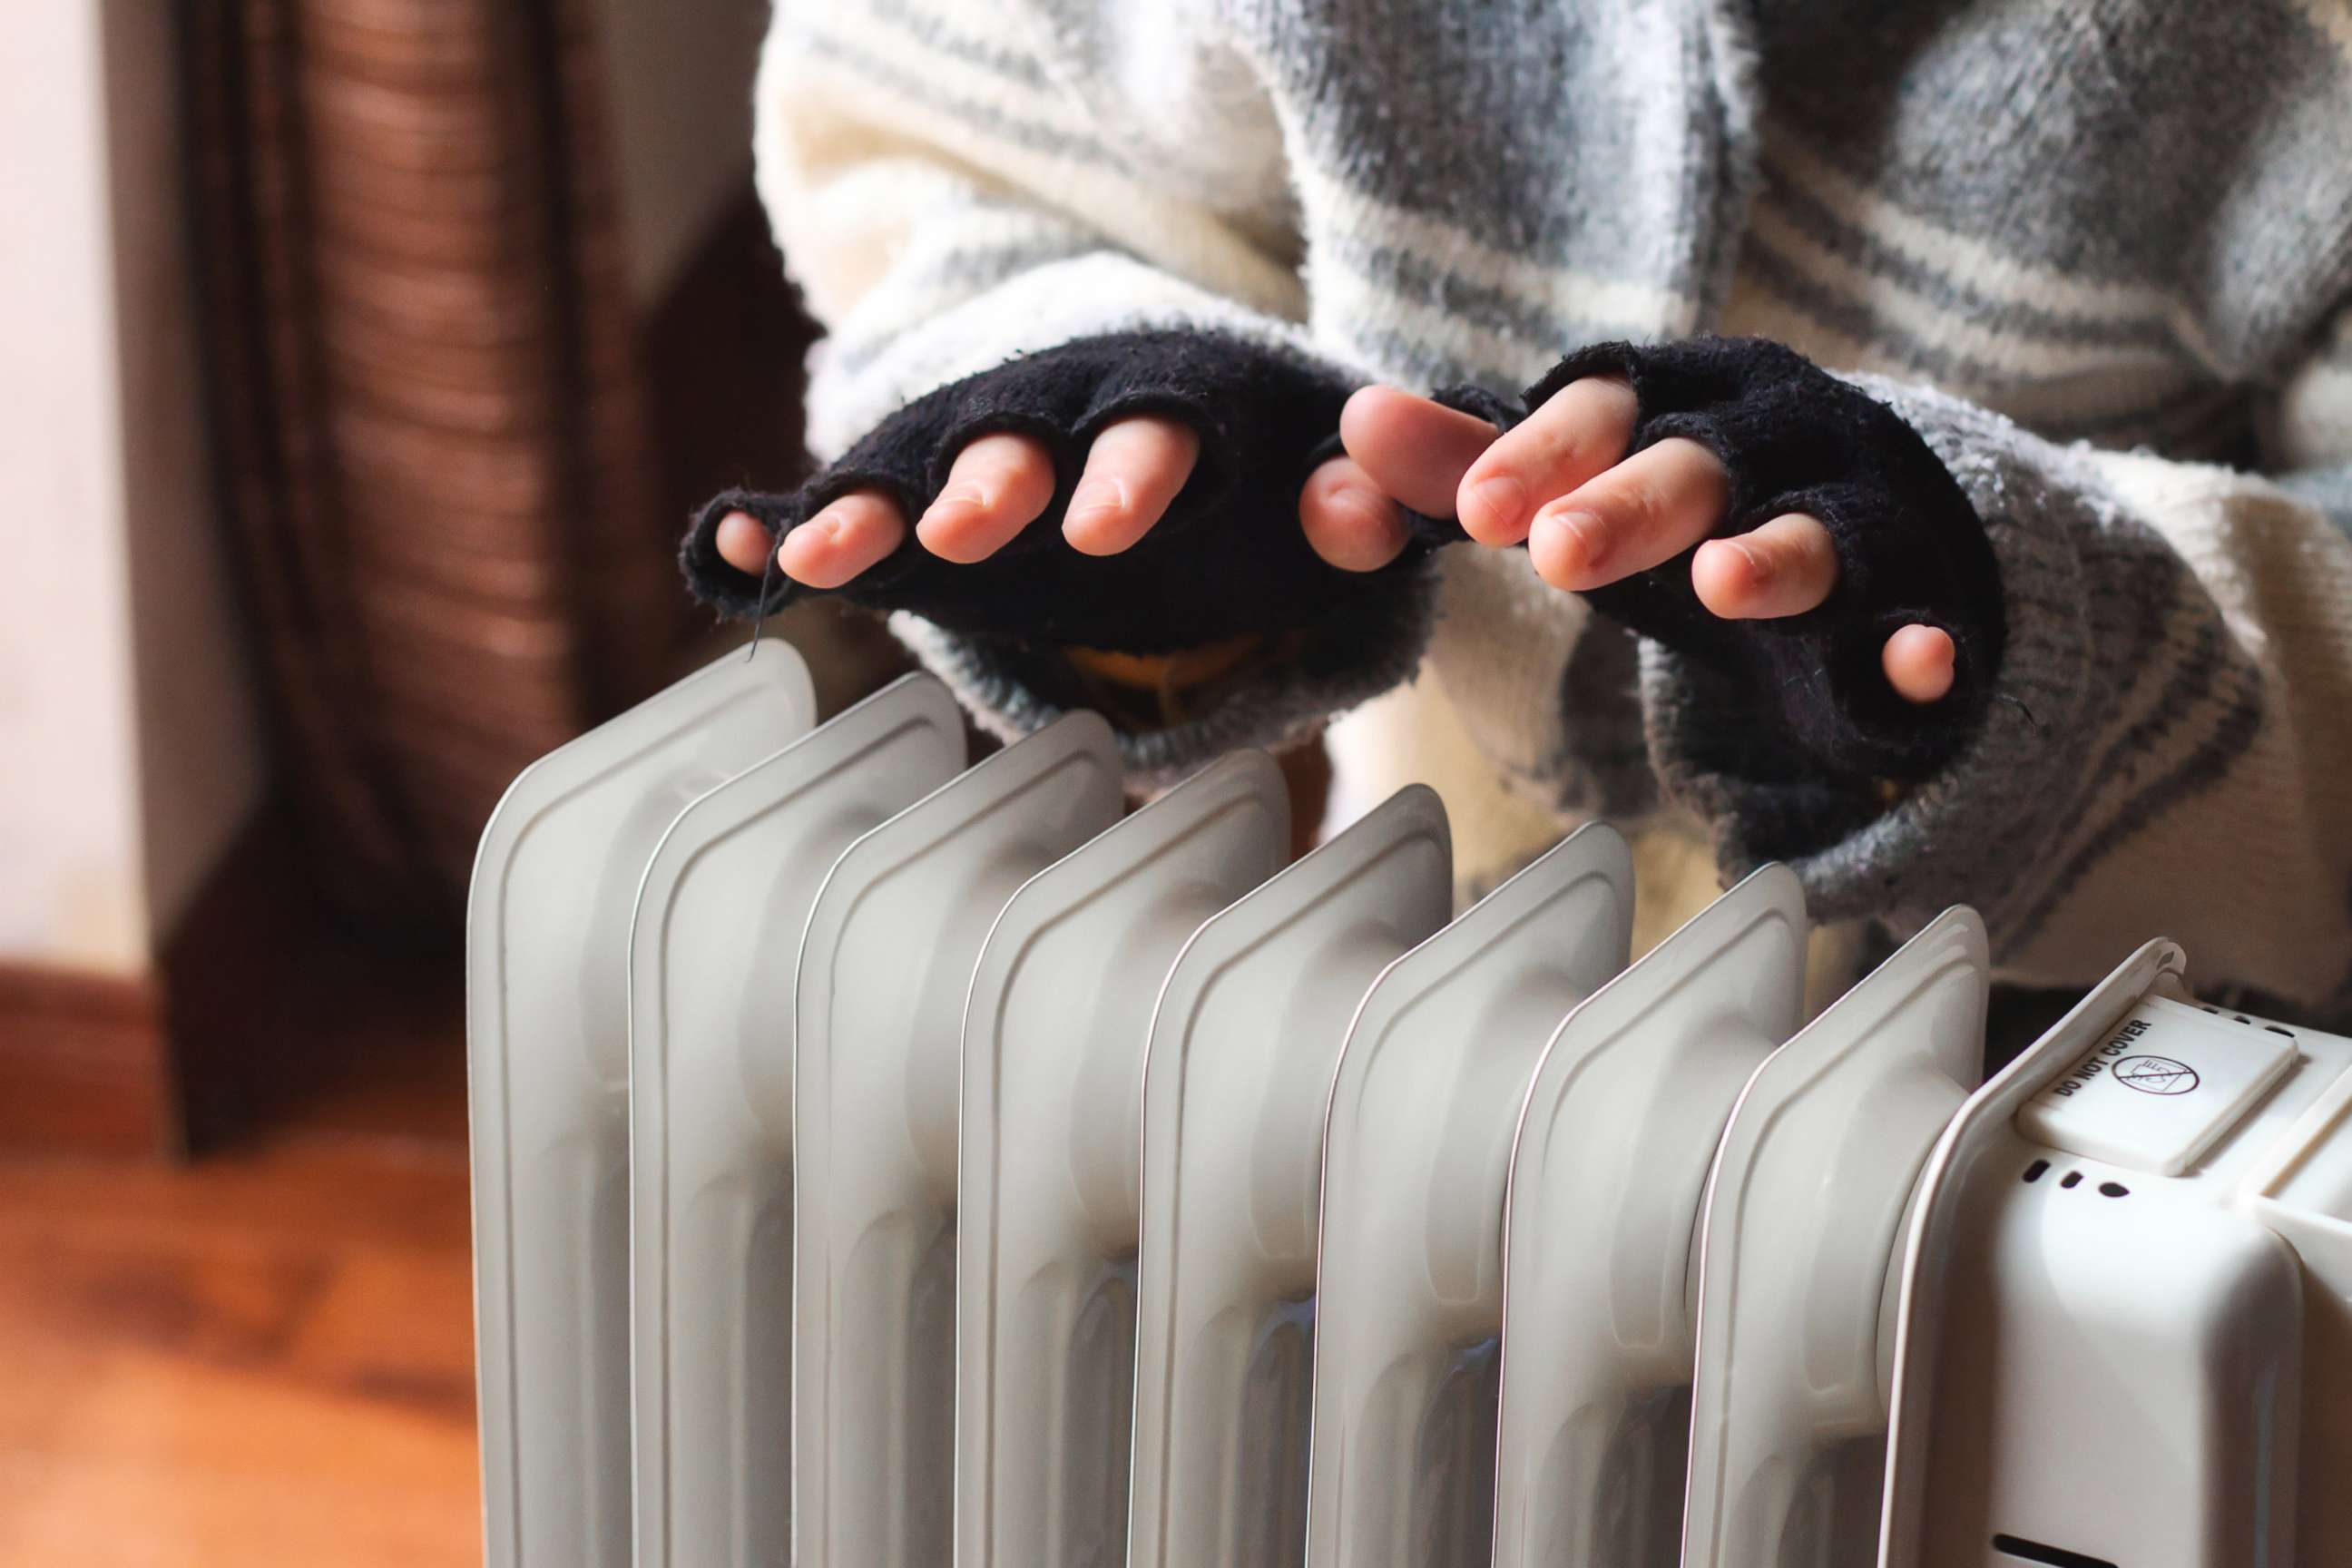 PHOTO: Person heating their hands at home over a domestic portable radiator in winter